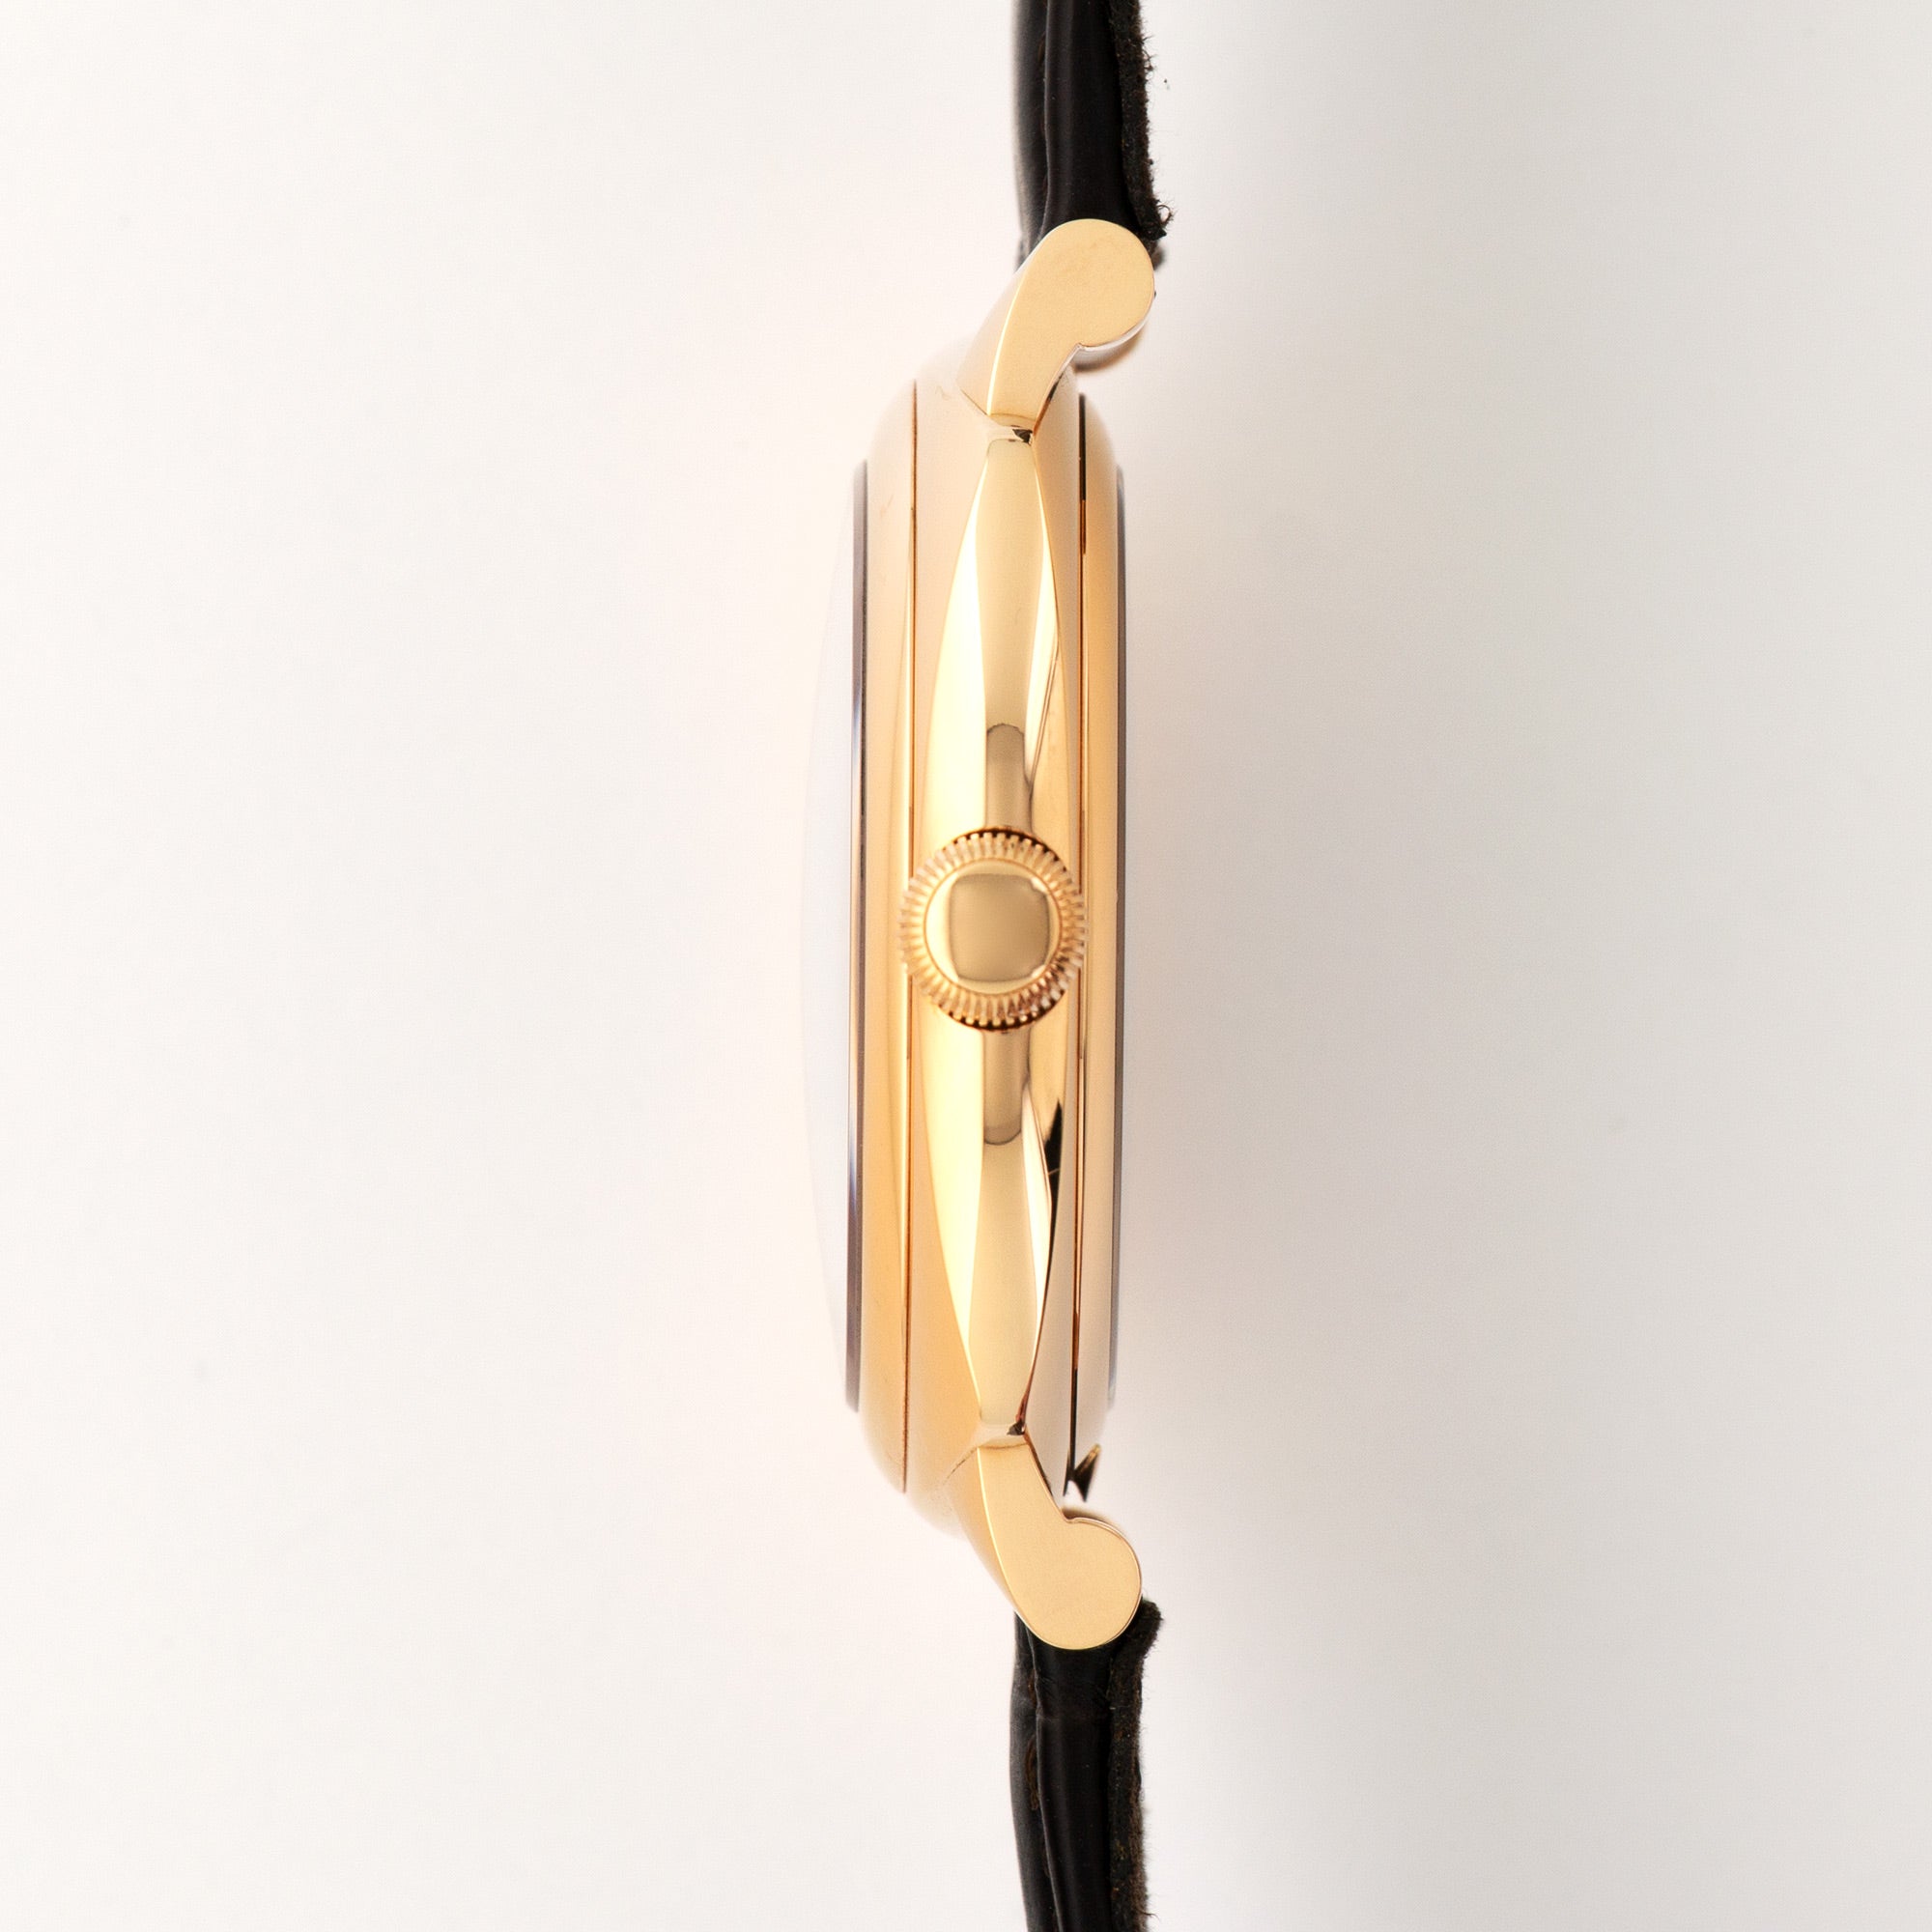 Laurent Ferrier - Laurent Ferrier Rose Gold Galet Square Watch - The Keystone Watches